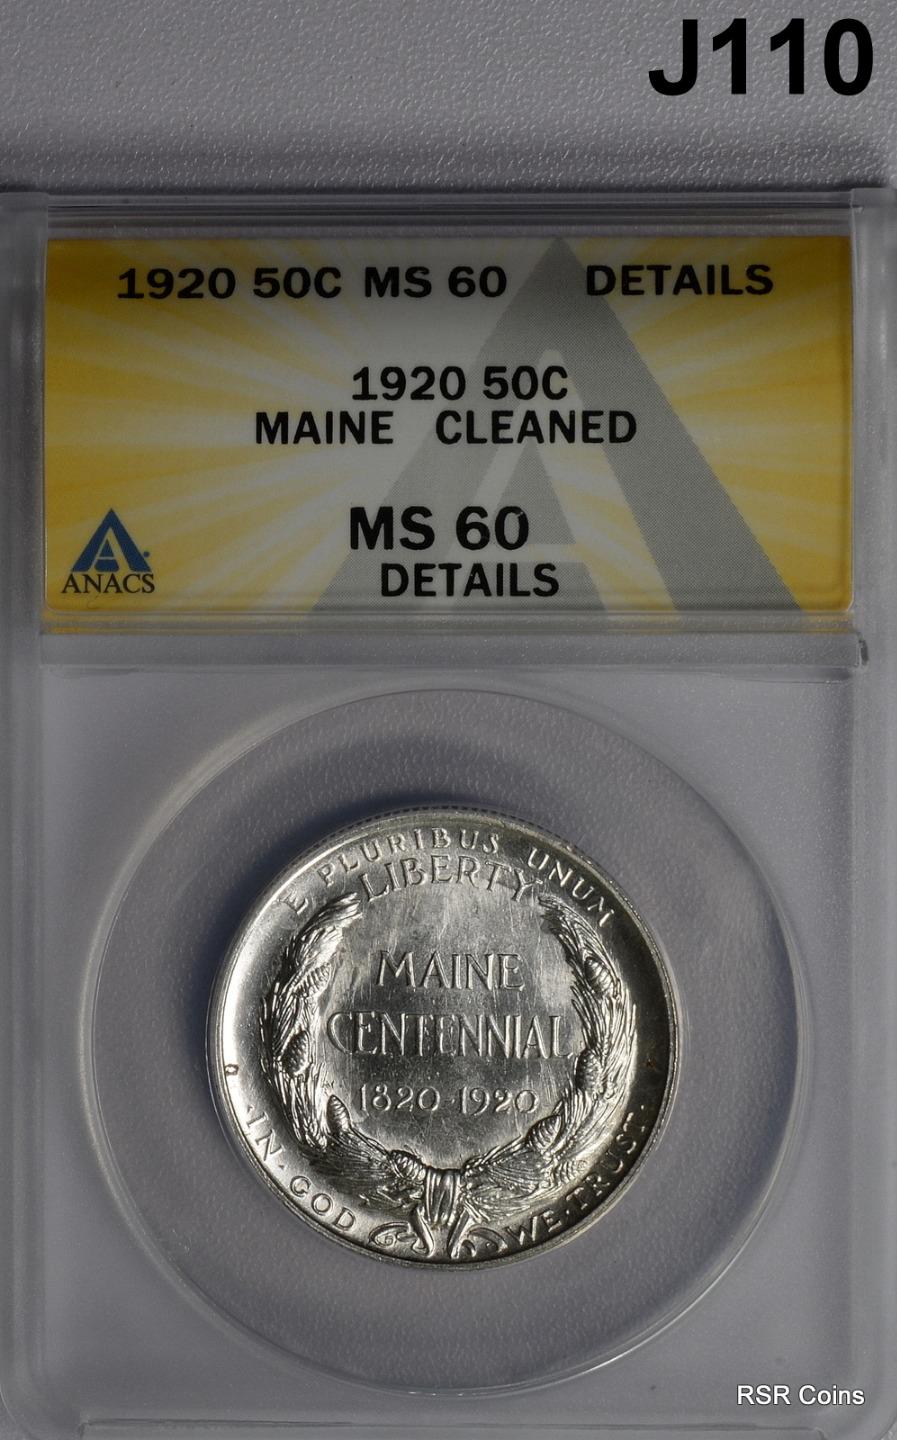 1920 MAINE CENTENNIAL COMMEMORATIVE HALF ANACS CERTIFIED MS60 CLEANED #J110